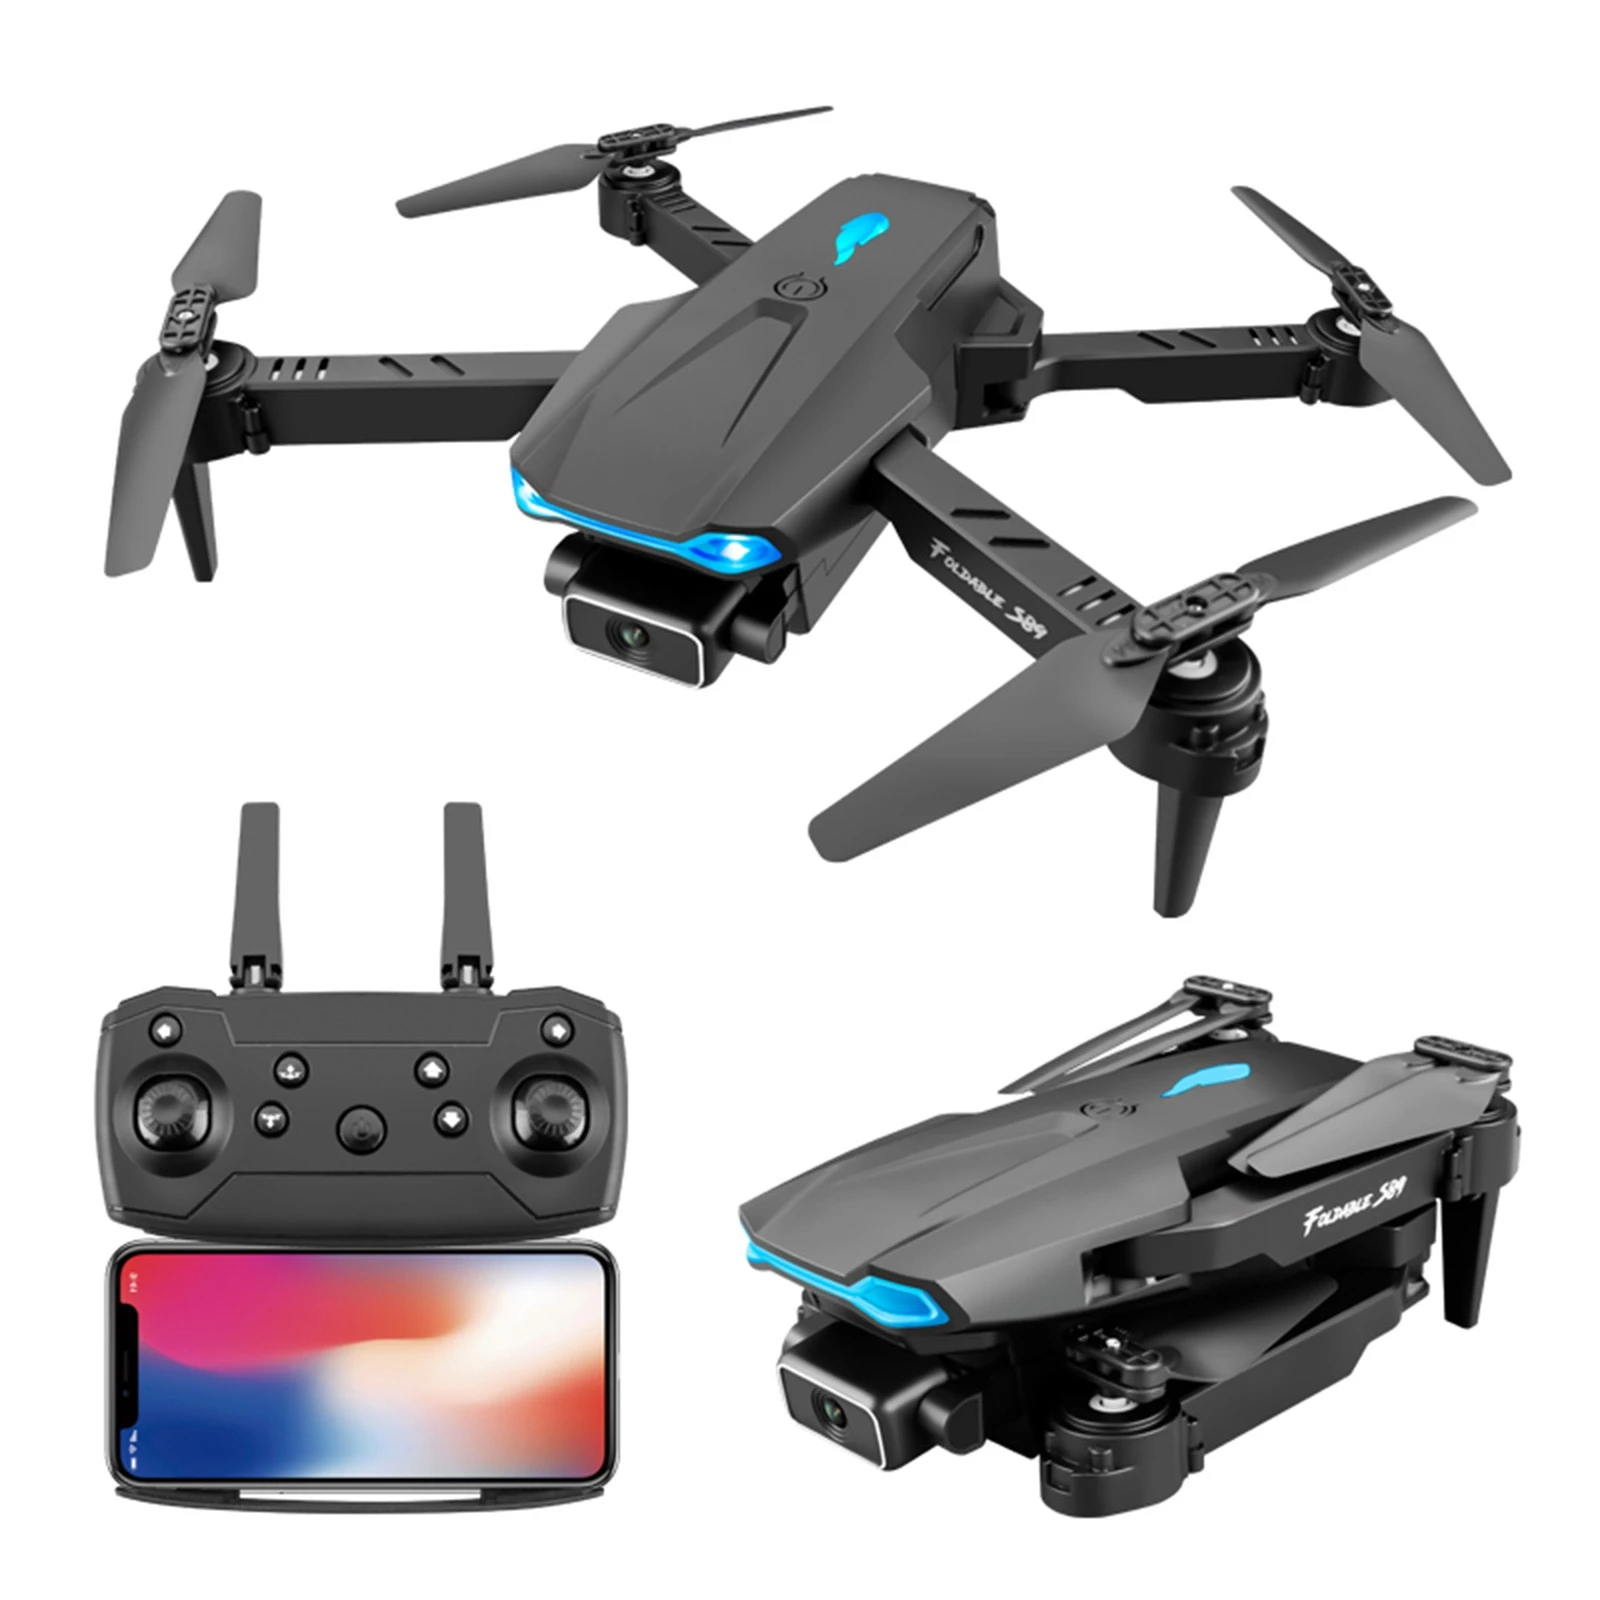 Hd Camera Selfie Drones | Drone Camera Wifi | Drone S89 Camera | Helicopter Toy - Drones Aliexpress